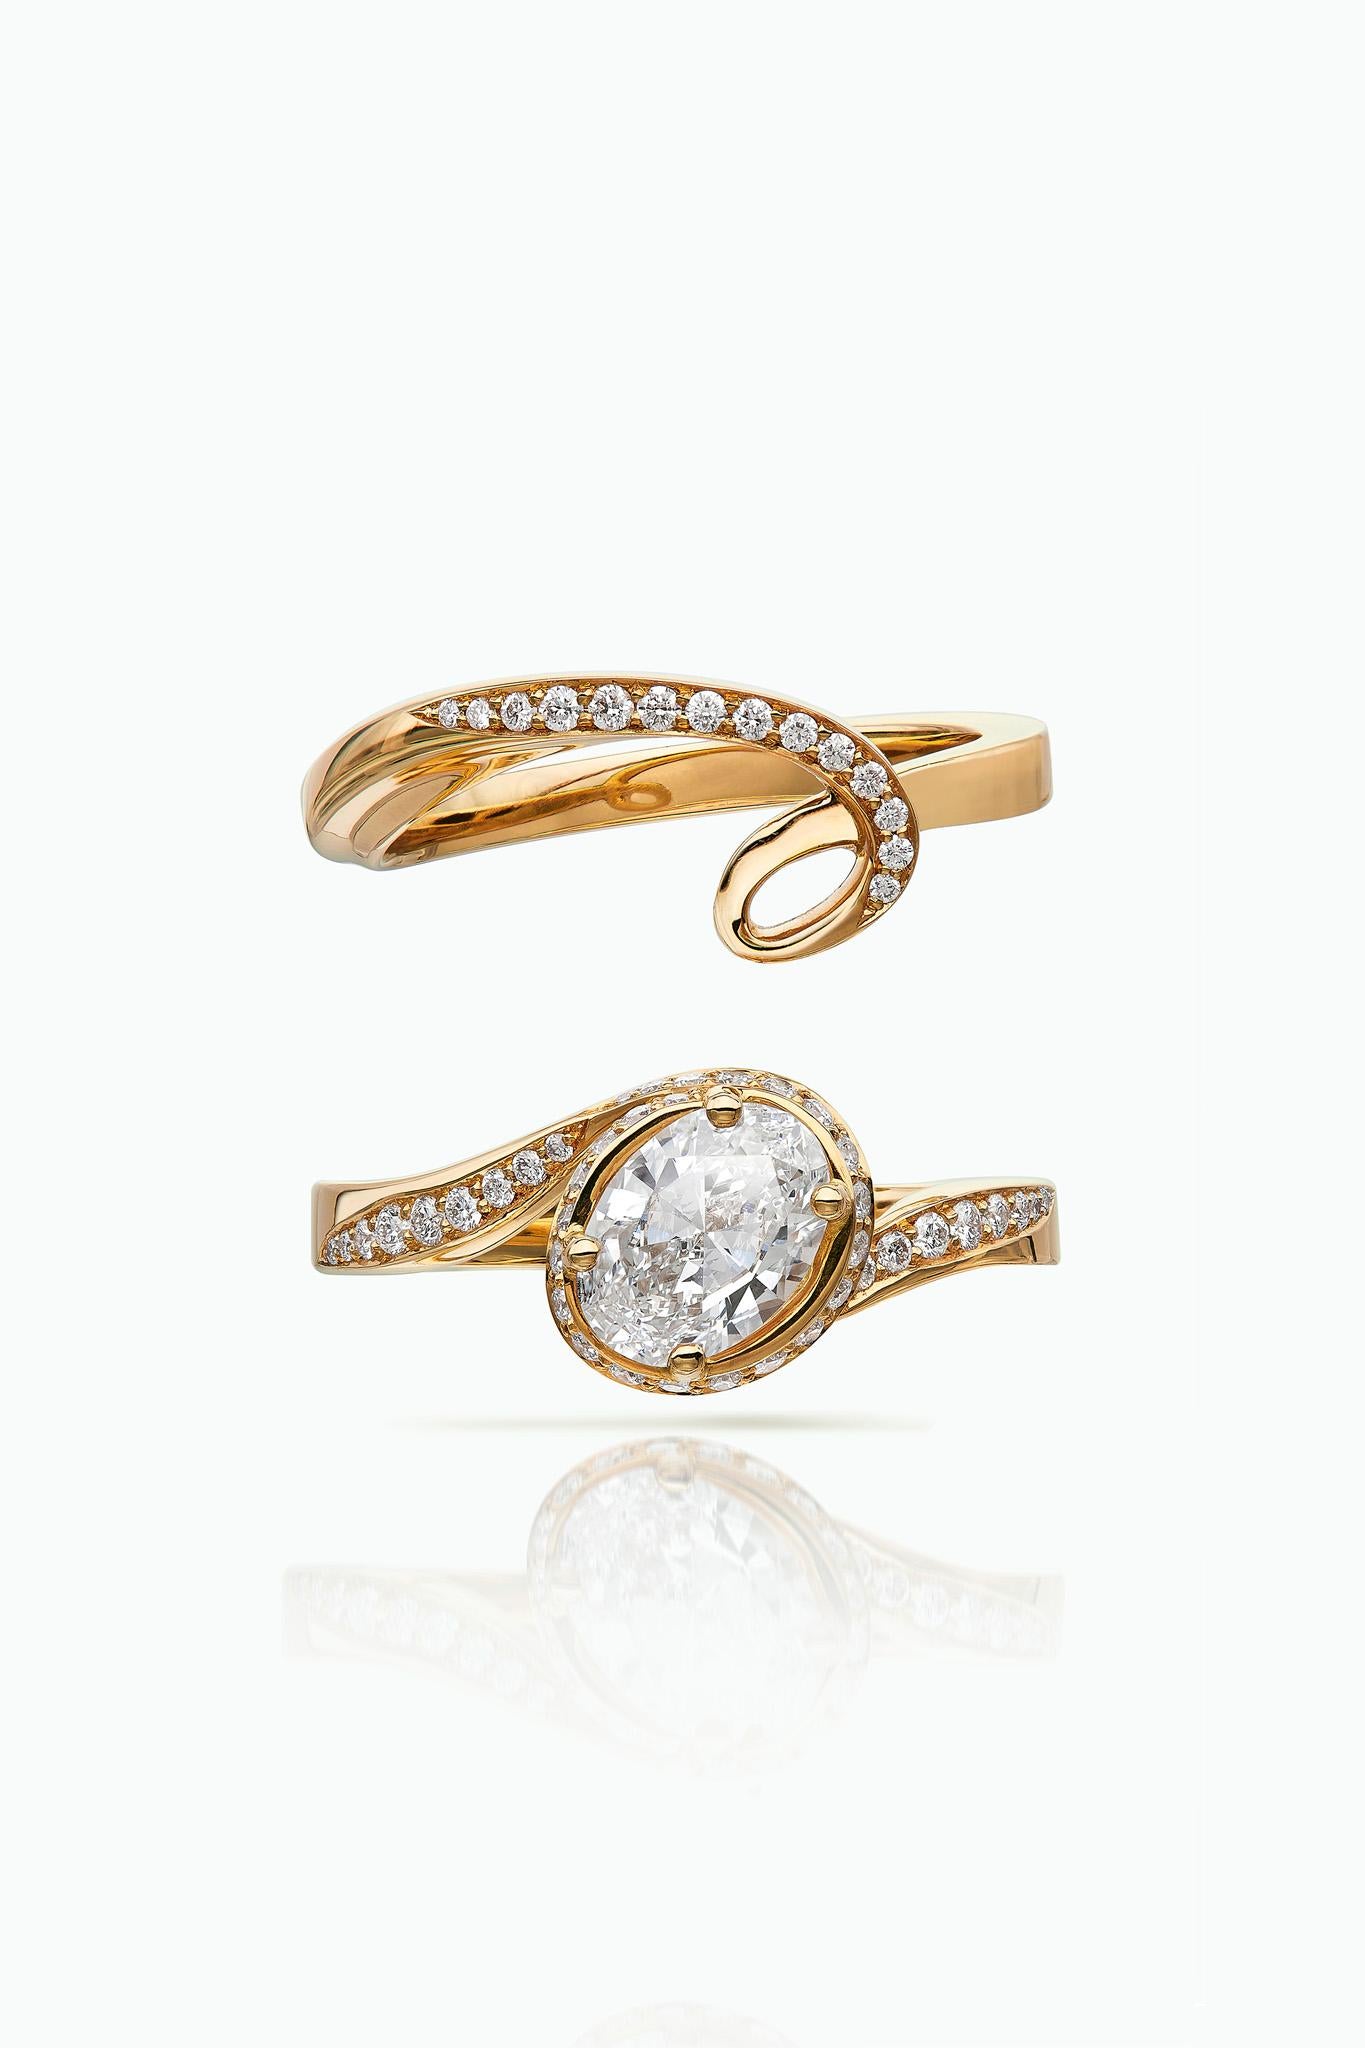 For Sale:  Handcrafted, Diamond Solitaire Engagement Ring and Wedding Band, 18K Gold 2